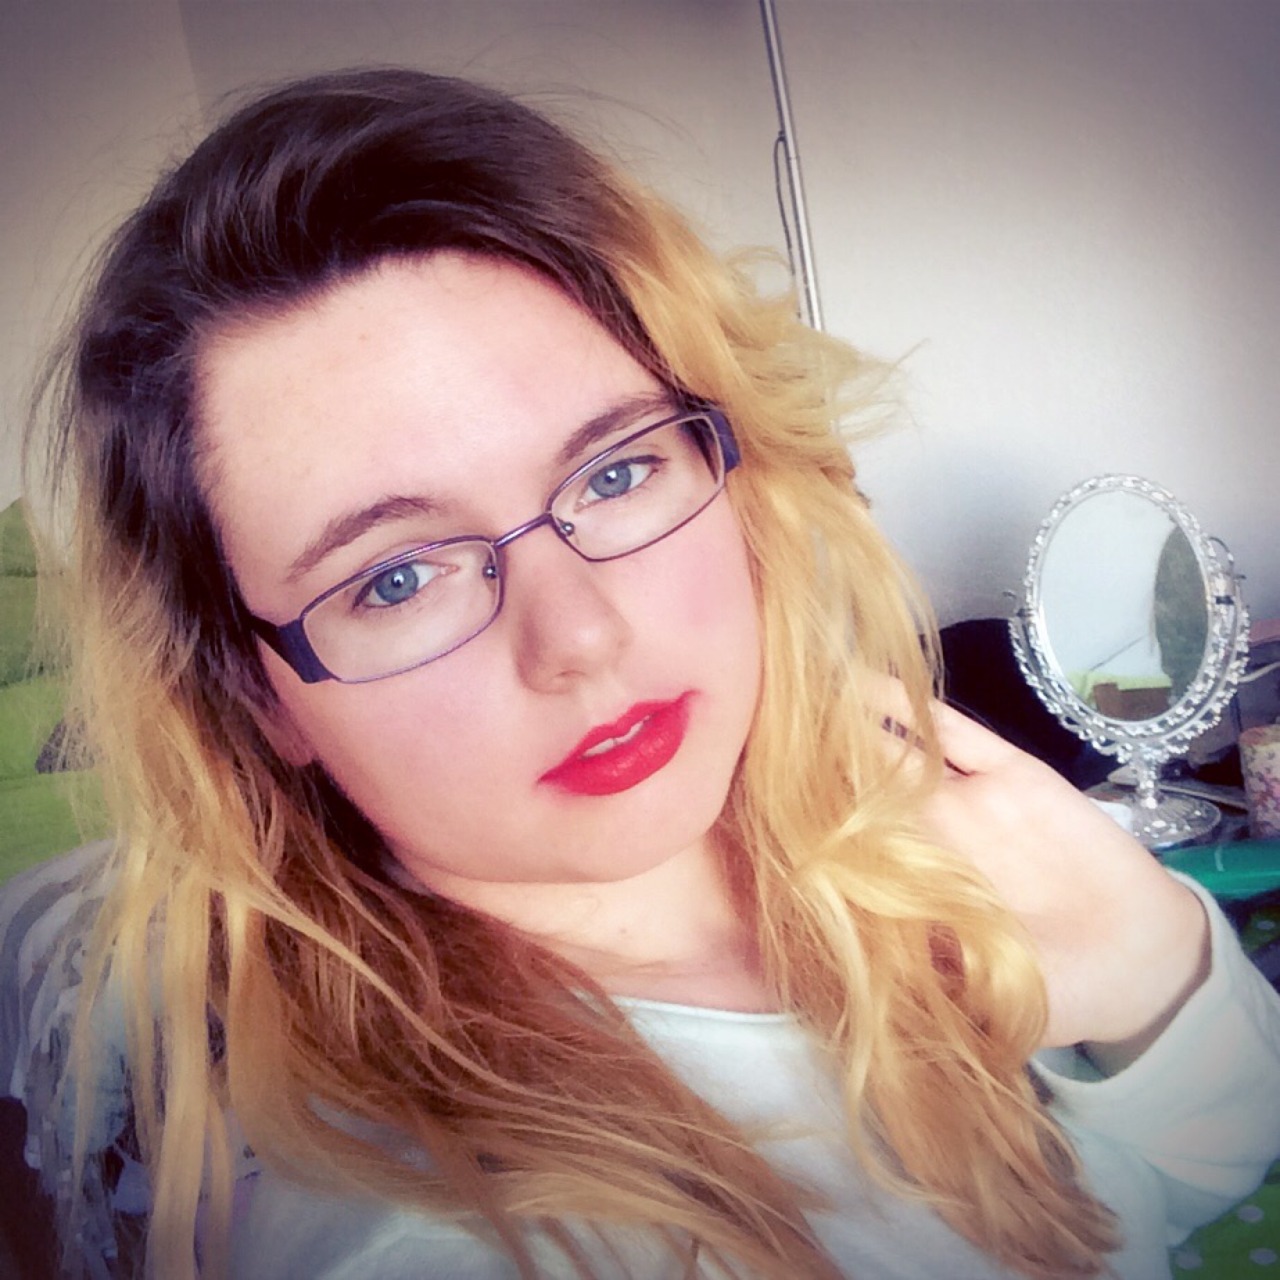 Yesterday I felt extremely beautiful and sexy with my red lipstick on.